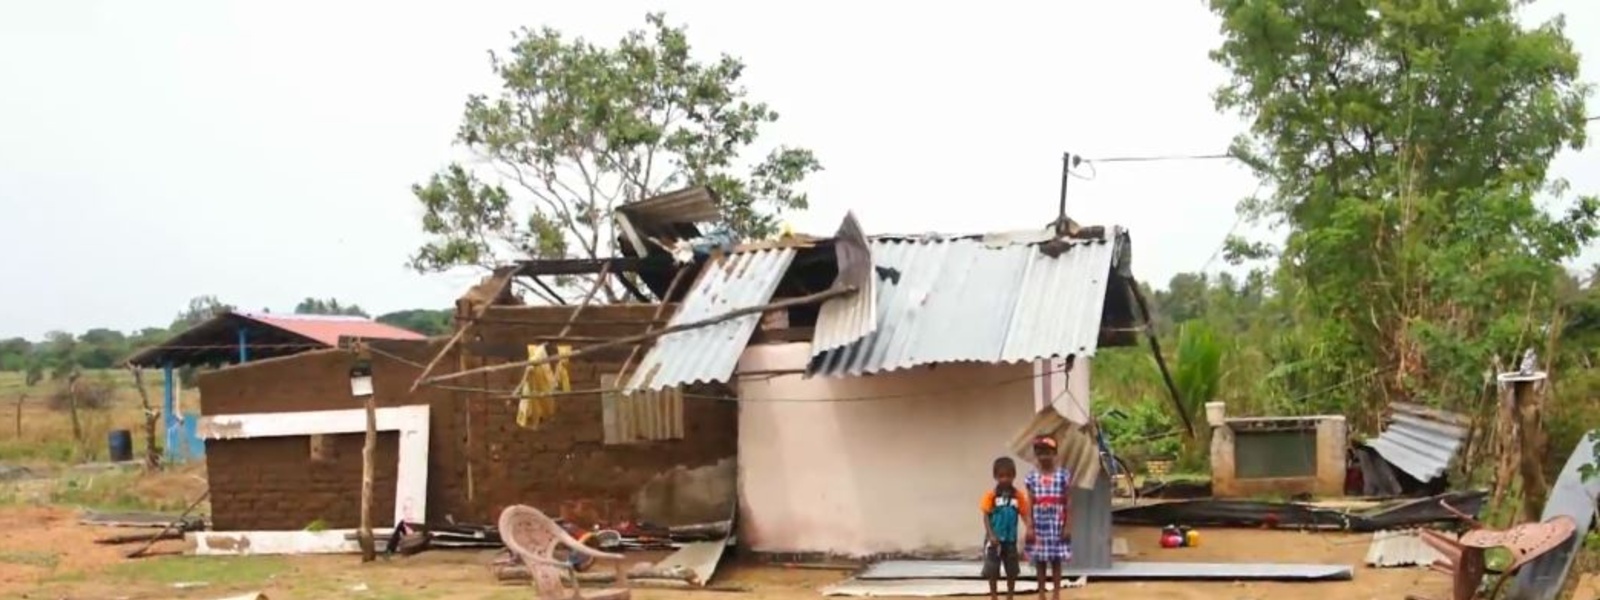 Gale winds damaged 112 houses and 37 business establishments across many areas